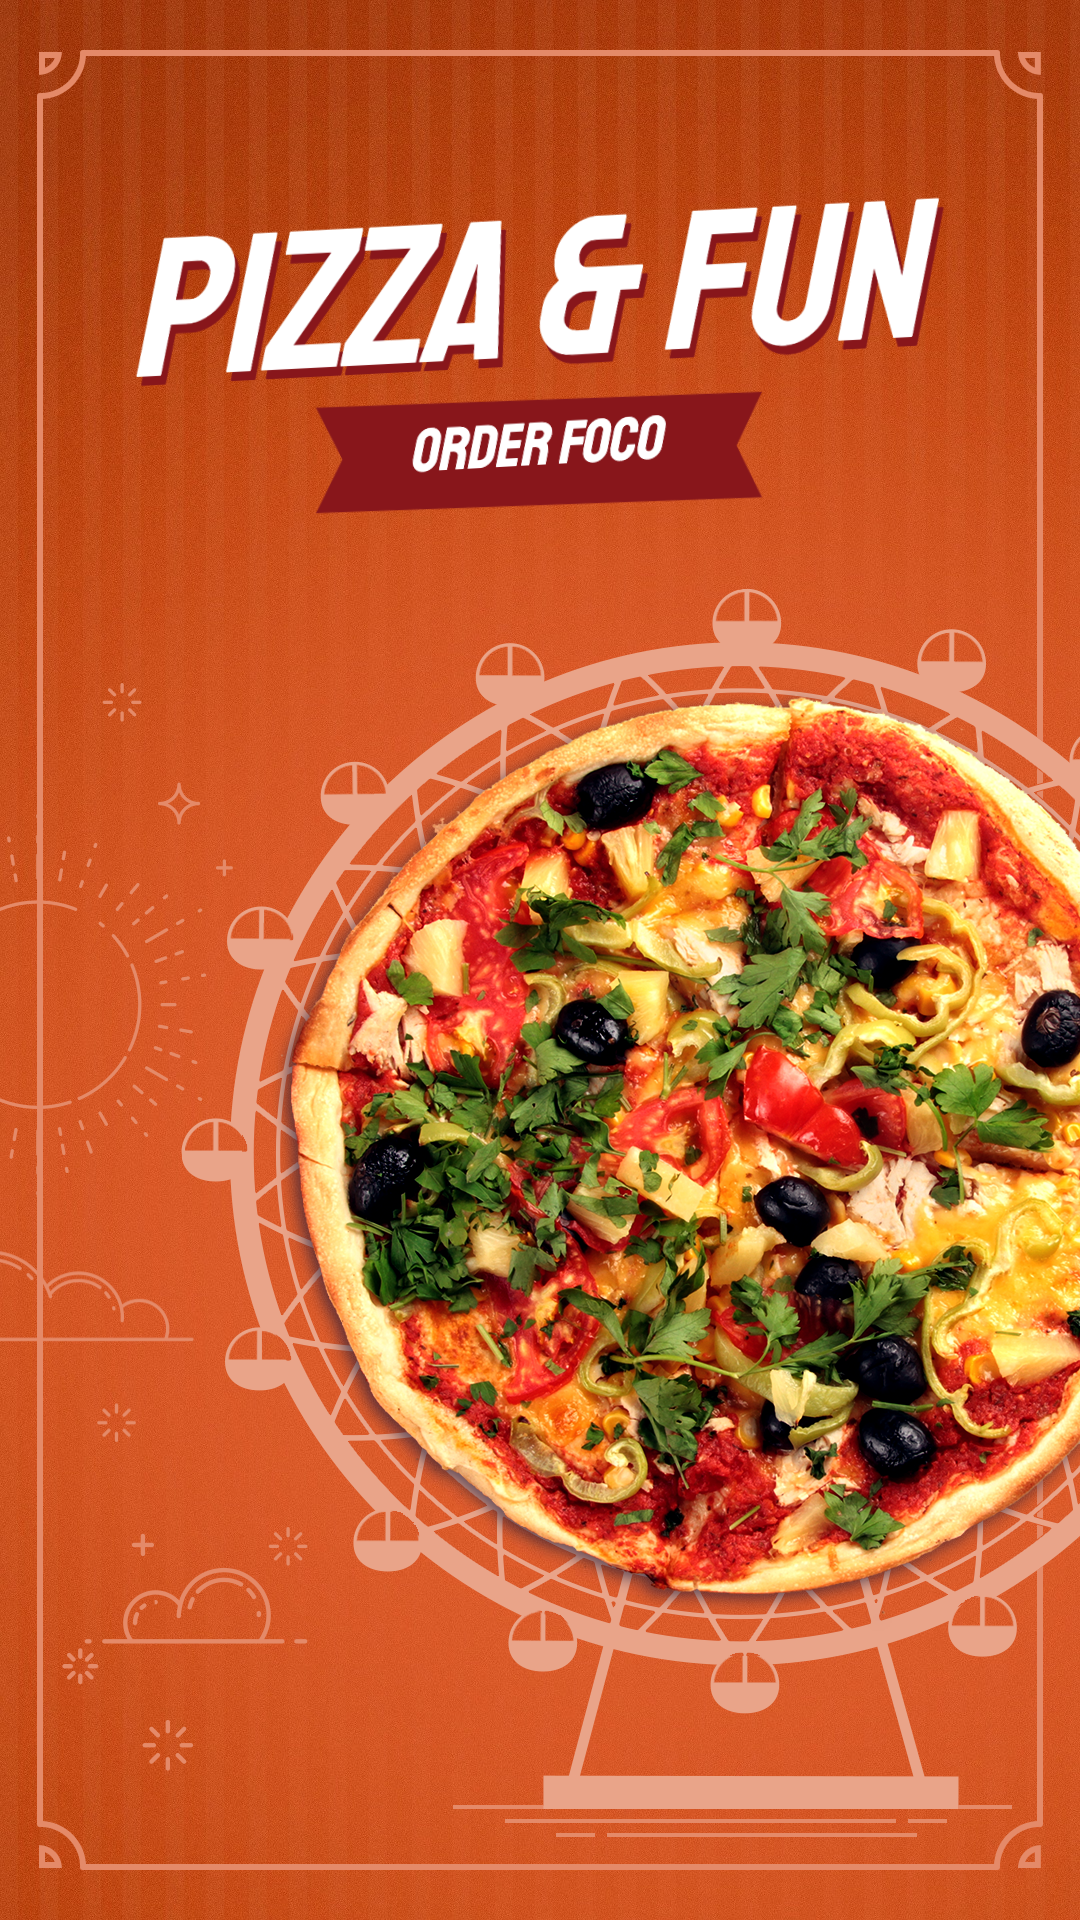 Creative Pizza Delicacy Display Ecommerce Story预览效果